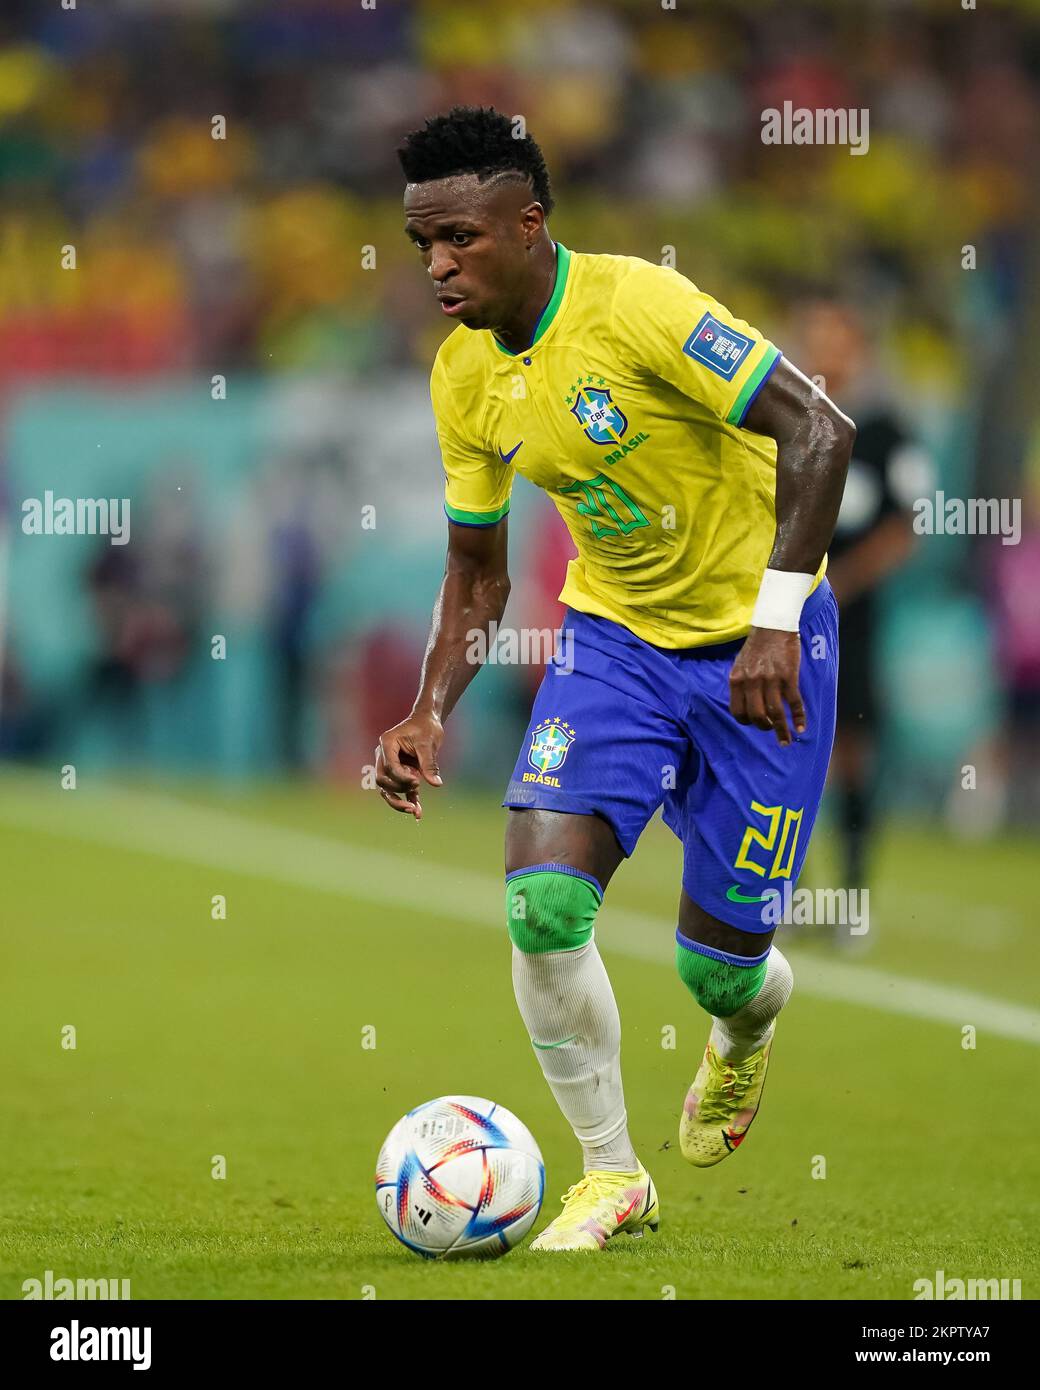 DOHA, QATAR - NOVEMBER 28: Player of Brazil Vinícius Júnior drives the ball during the FIFA World Cup Qatar 2022 group G match between Brazil and Switzerland at Stadium 974 on November 28, 2022 in Doha, Qatar. (Photo by Florencia Tan Jun/PxImages) Stock Photo